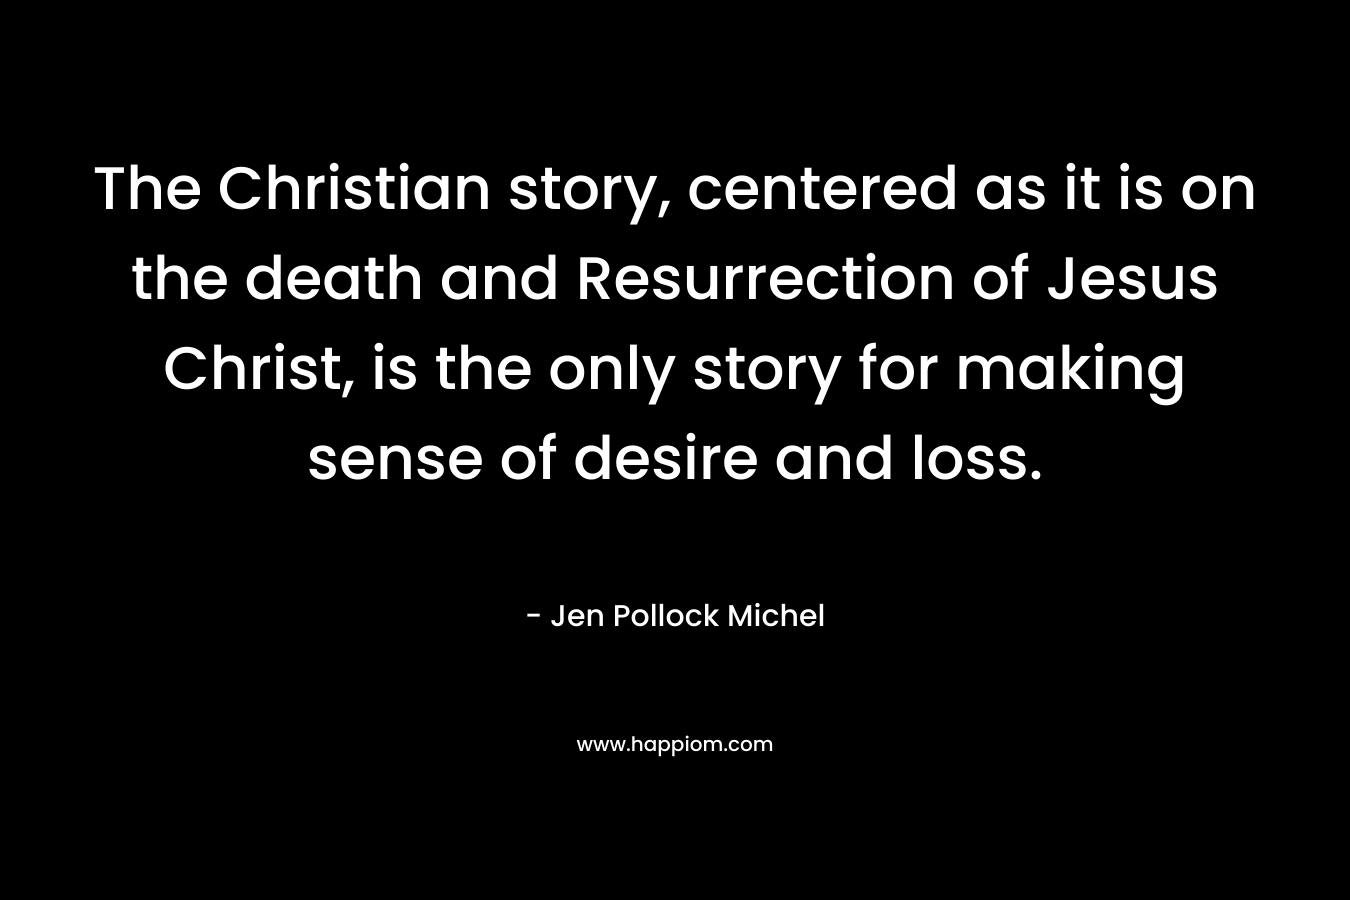 The Christian story, centered as it is on the death and Resurrection of Jesus Christ, is the only story for making sense of desire and loss.